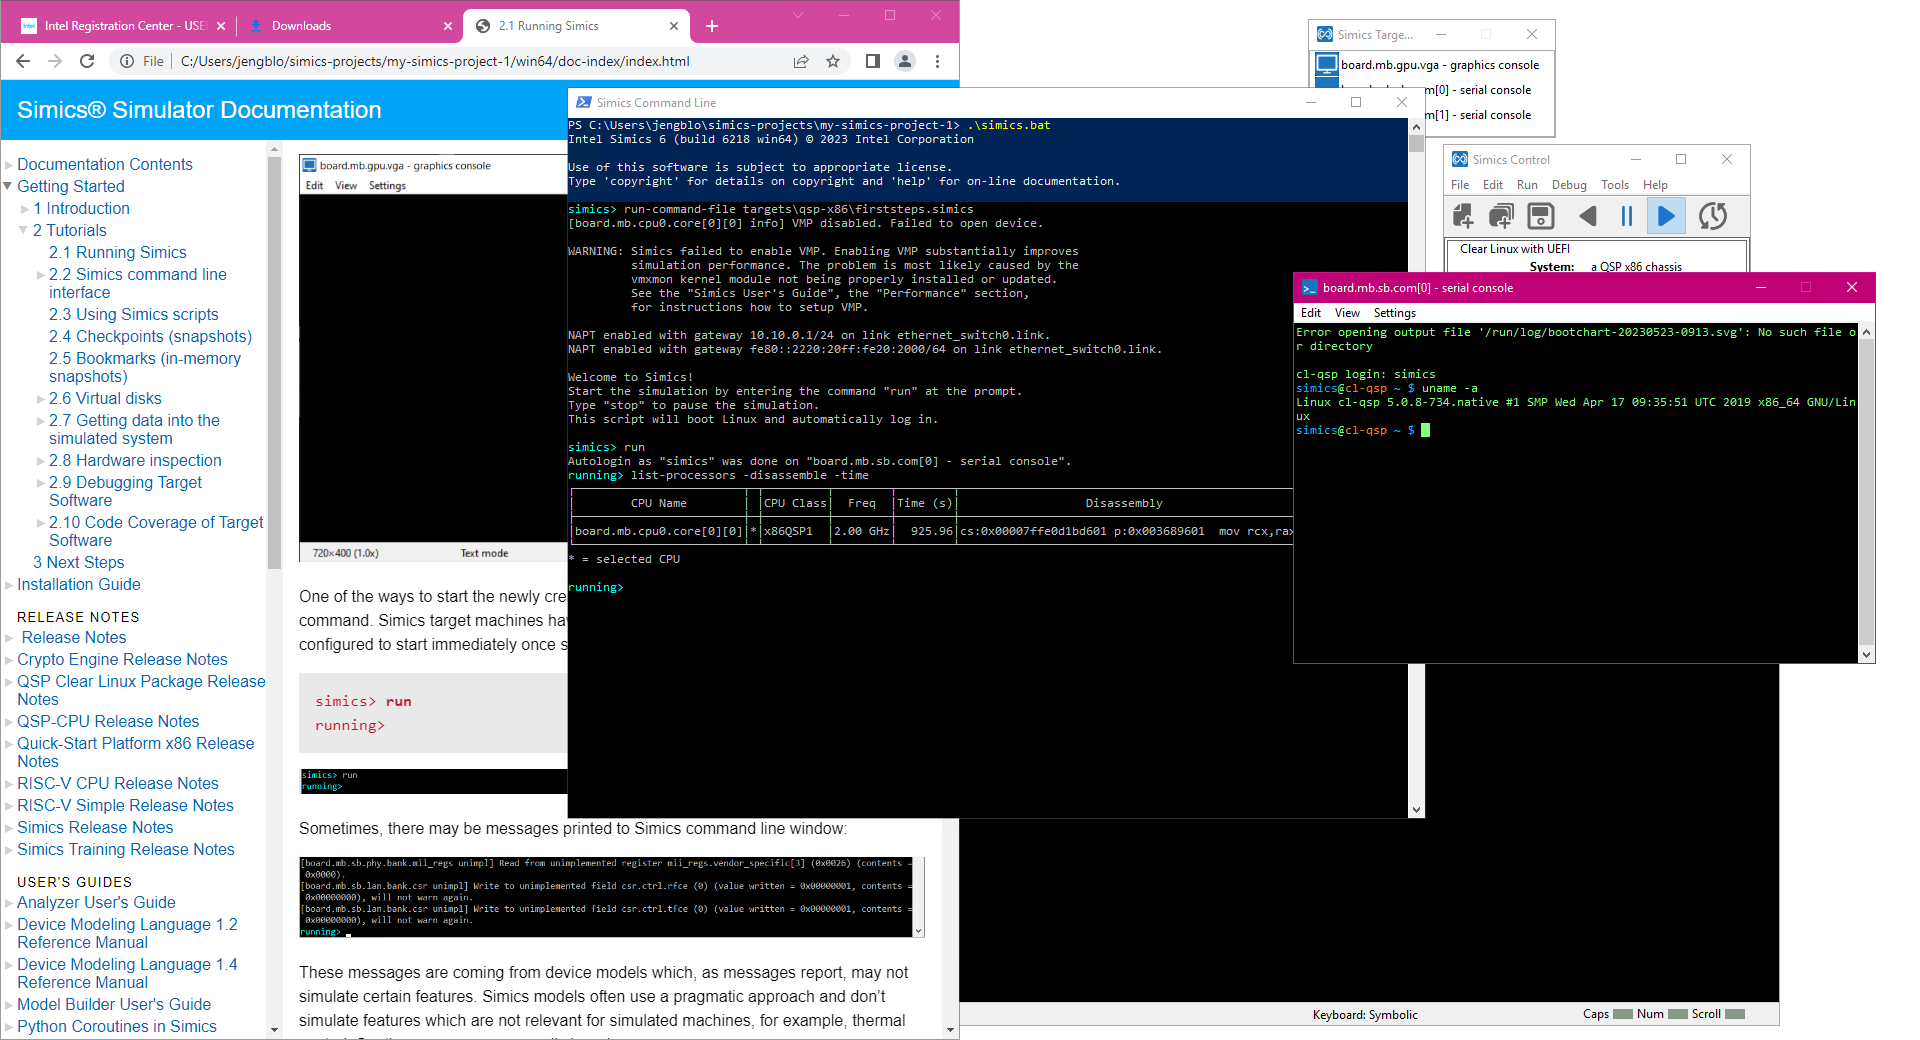 Working through the early parts of the Intel Simics simulator get started tutorial, showing the documentation in a web browser and the simulator running the firststeps.simics script